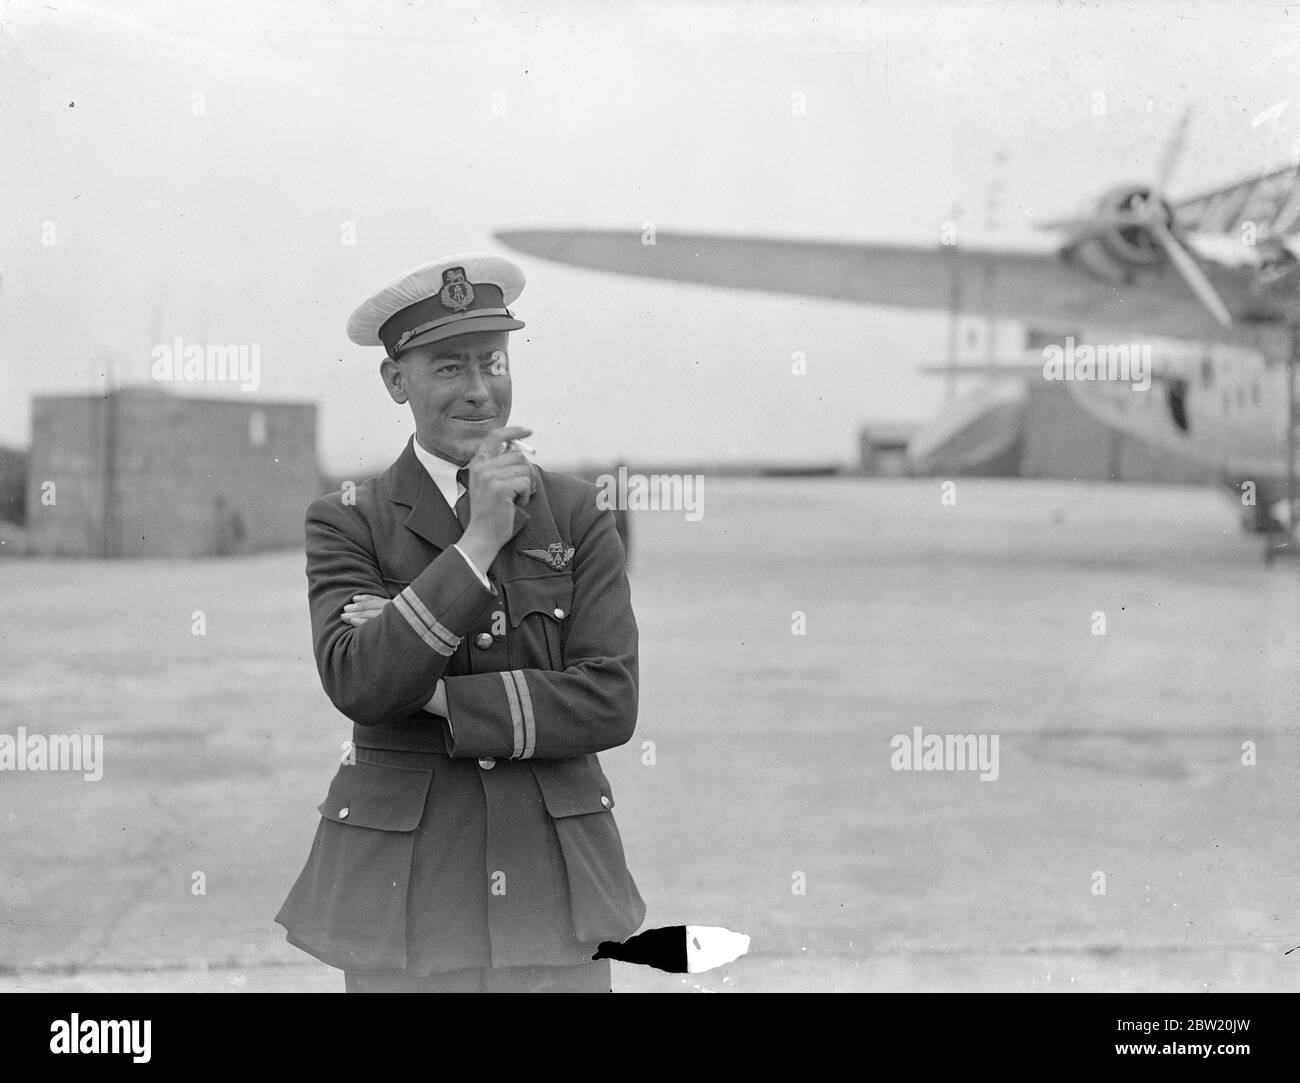 The Imperial Airways flying boat Caledonia arrived back at Southampton from the Foynes airbase, Ireland, after completing her first experimental doublecrossing of the Atlantic. The return ocean crossing was accomplished in 12 hours 7 minutes. First Officer Bowes. July 1937 [?] Stock Photo